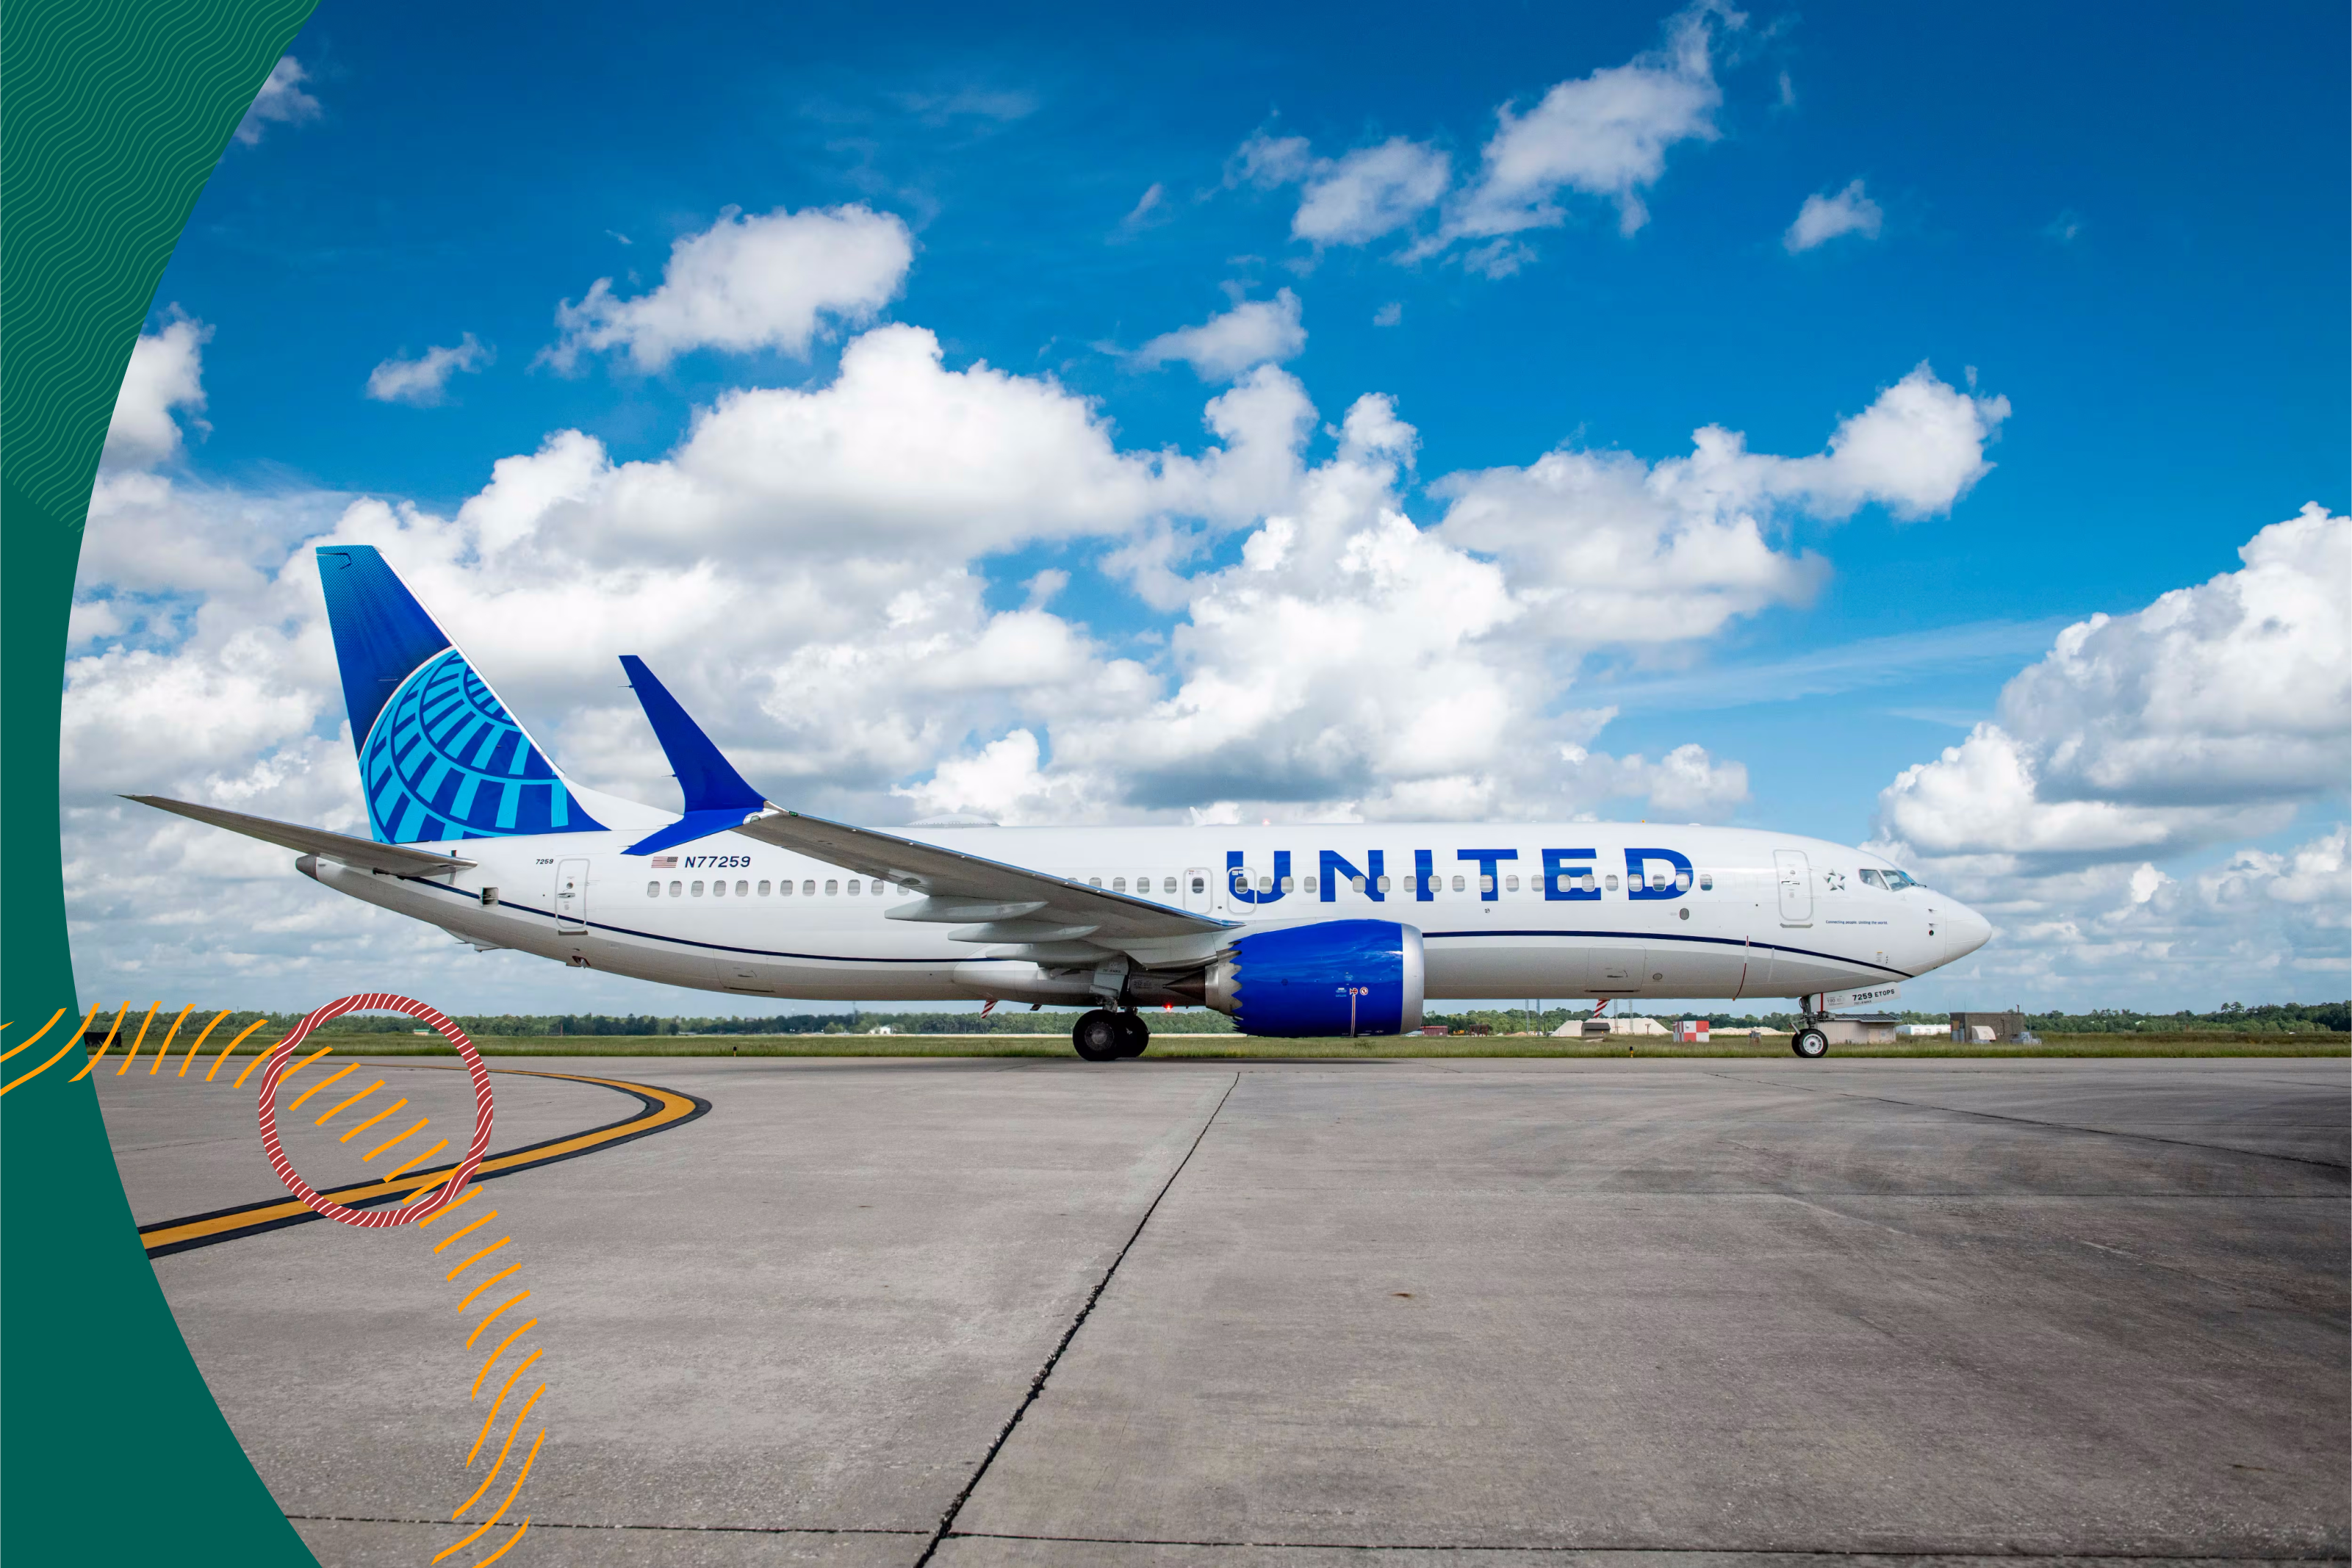 United Airlines plane on a sunny tarmac